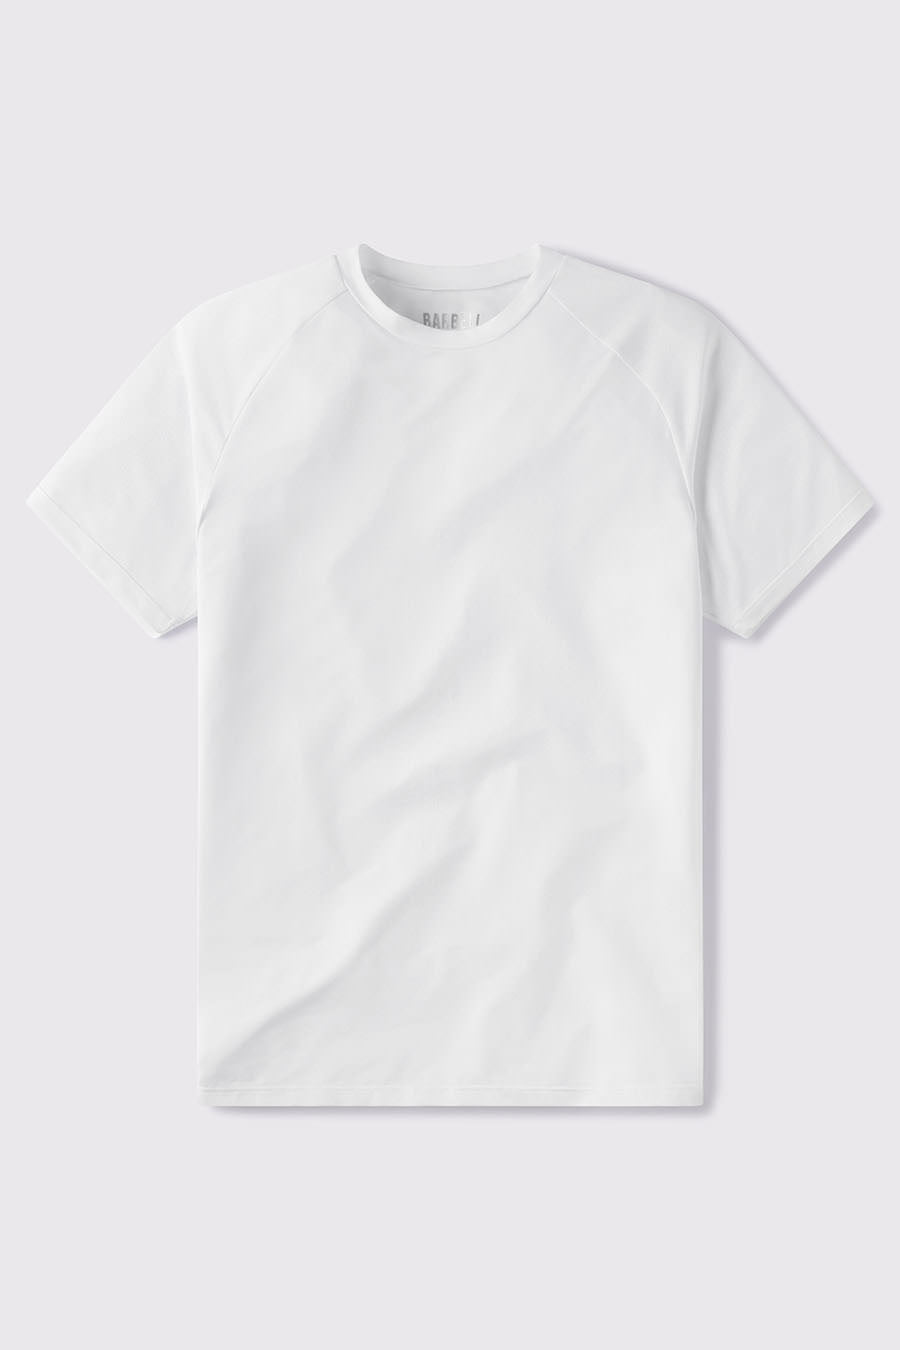 Ultralight Tech Tee - White - photo from front flat lay #color_white